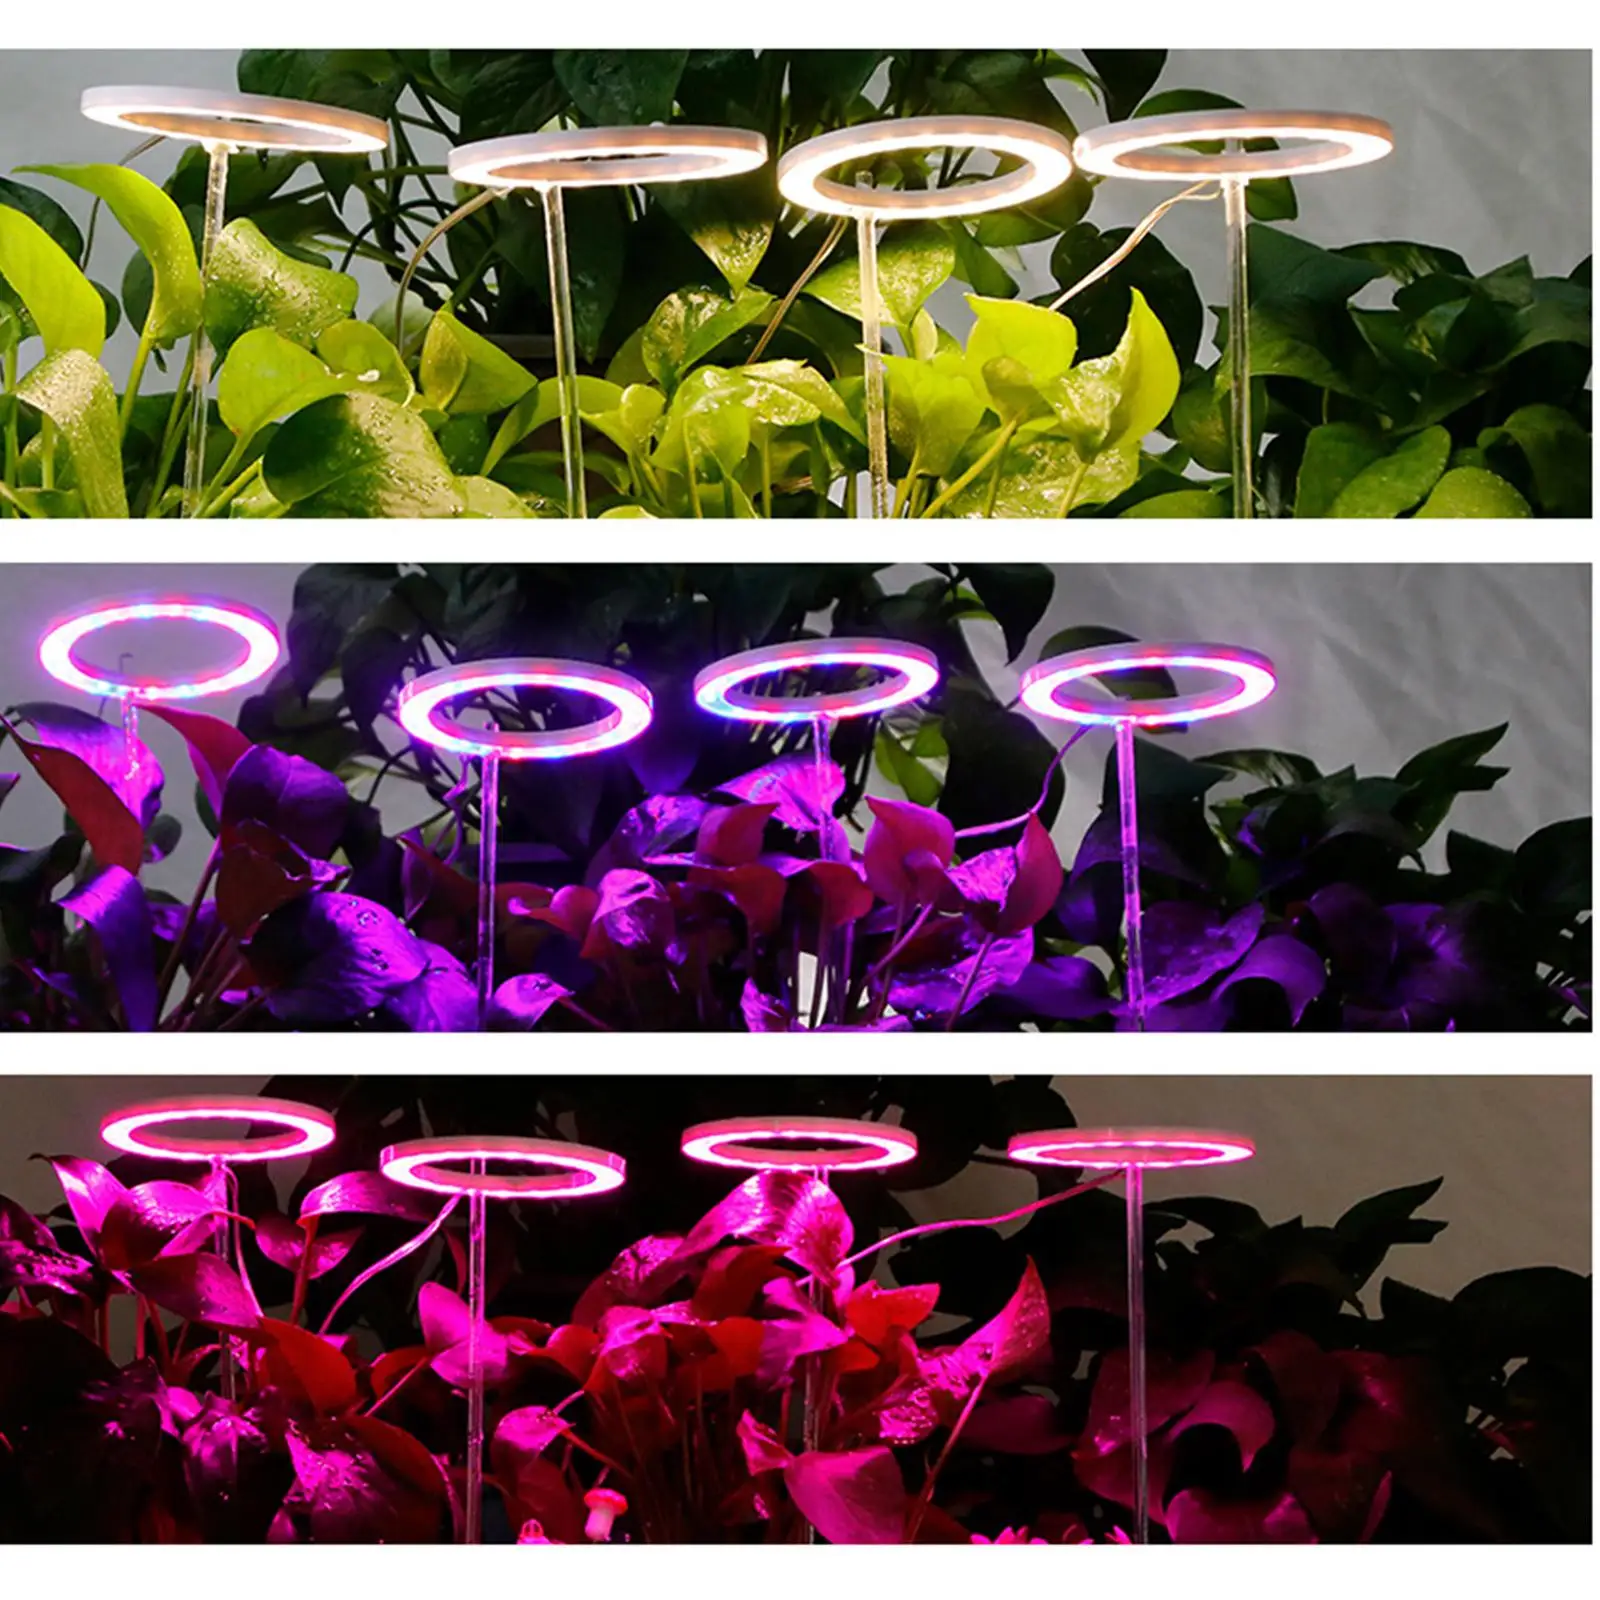 LED Grow Light 4 Lights Auto On Off Timing 8 12 16Hrs Plant Growing Lamp for Indoor